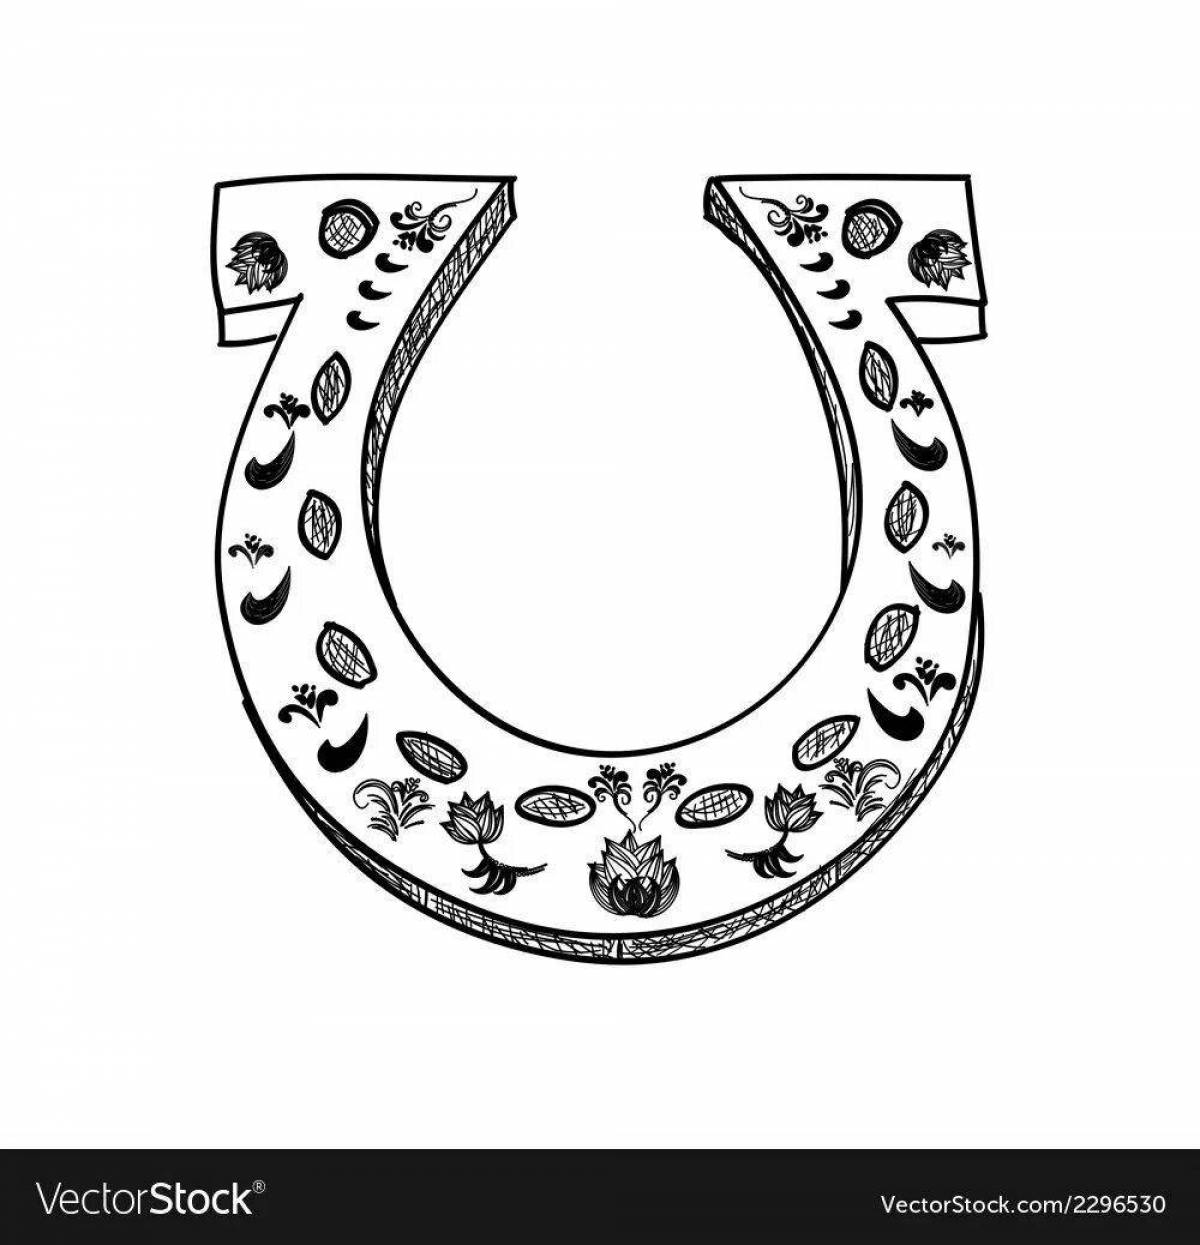 Exquisite horseshoe coloring book for kids